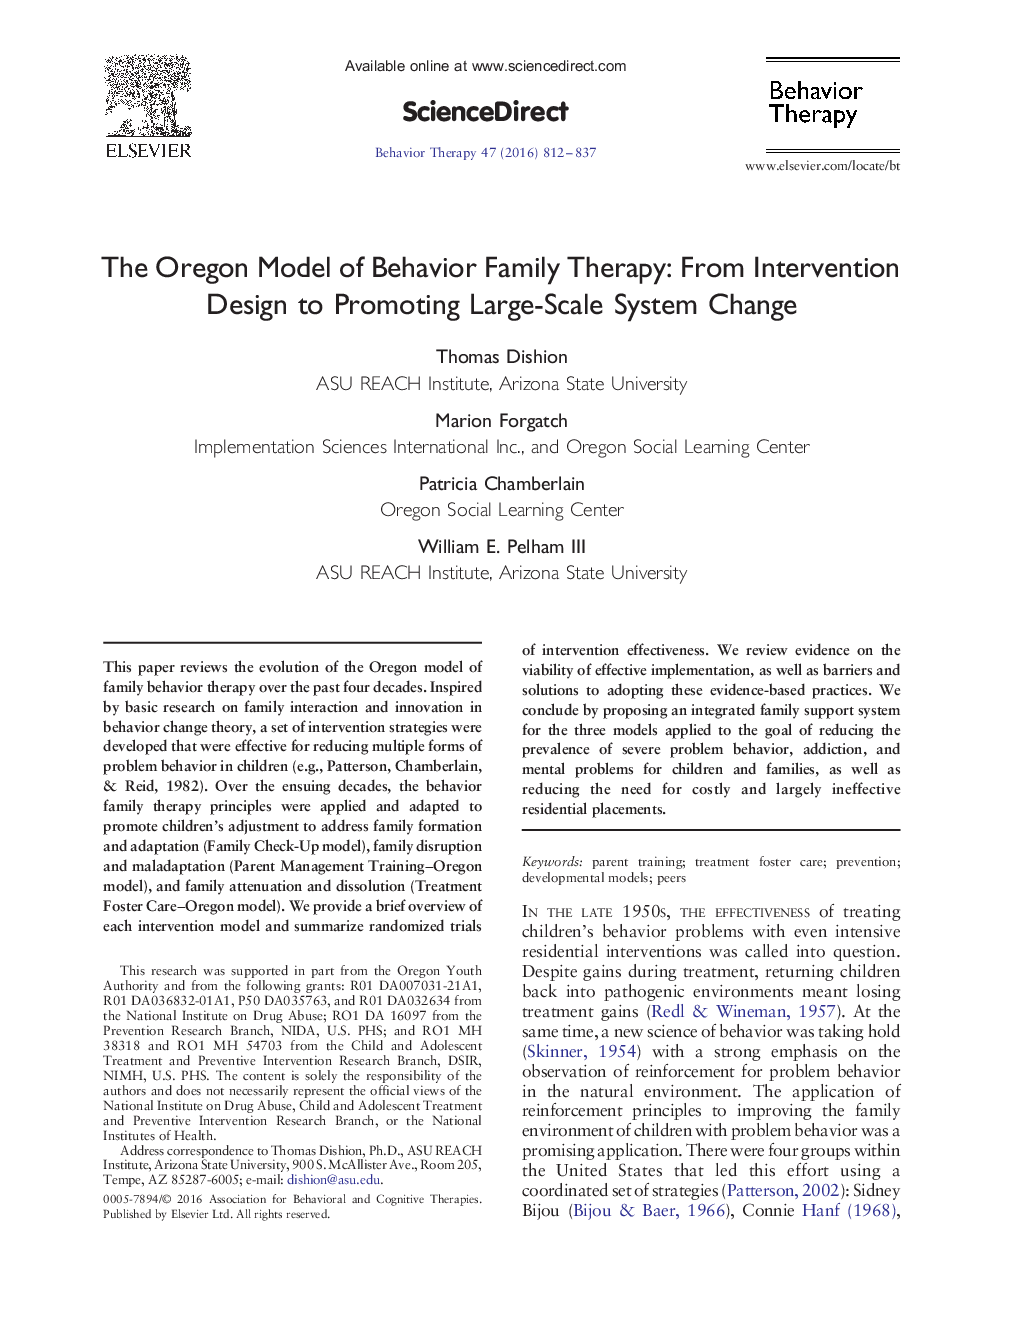 The Oregon Model of Behavior Family Therapy: From Intervention Design to Promoting Large-Scale System Change